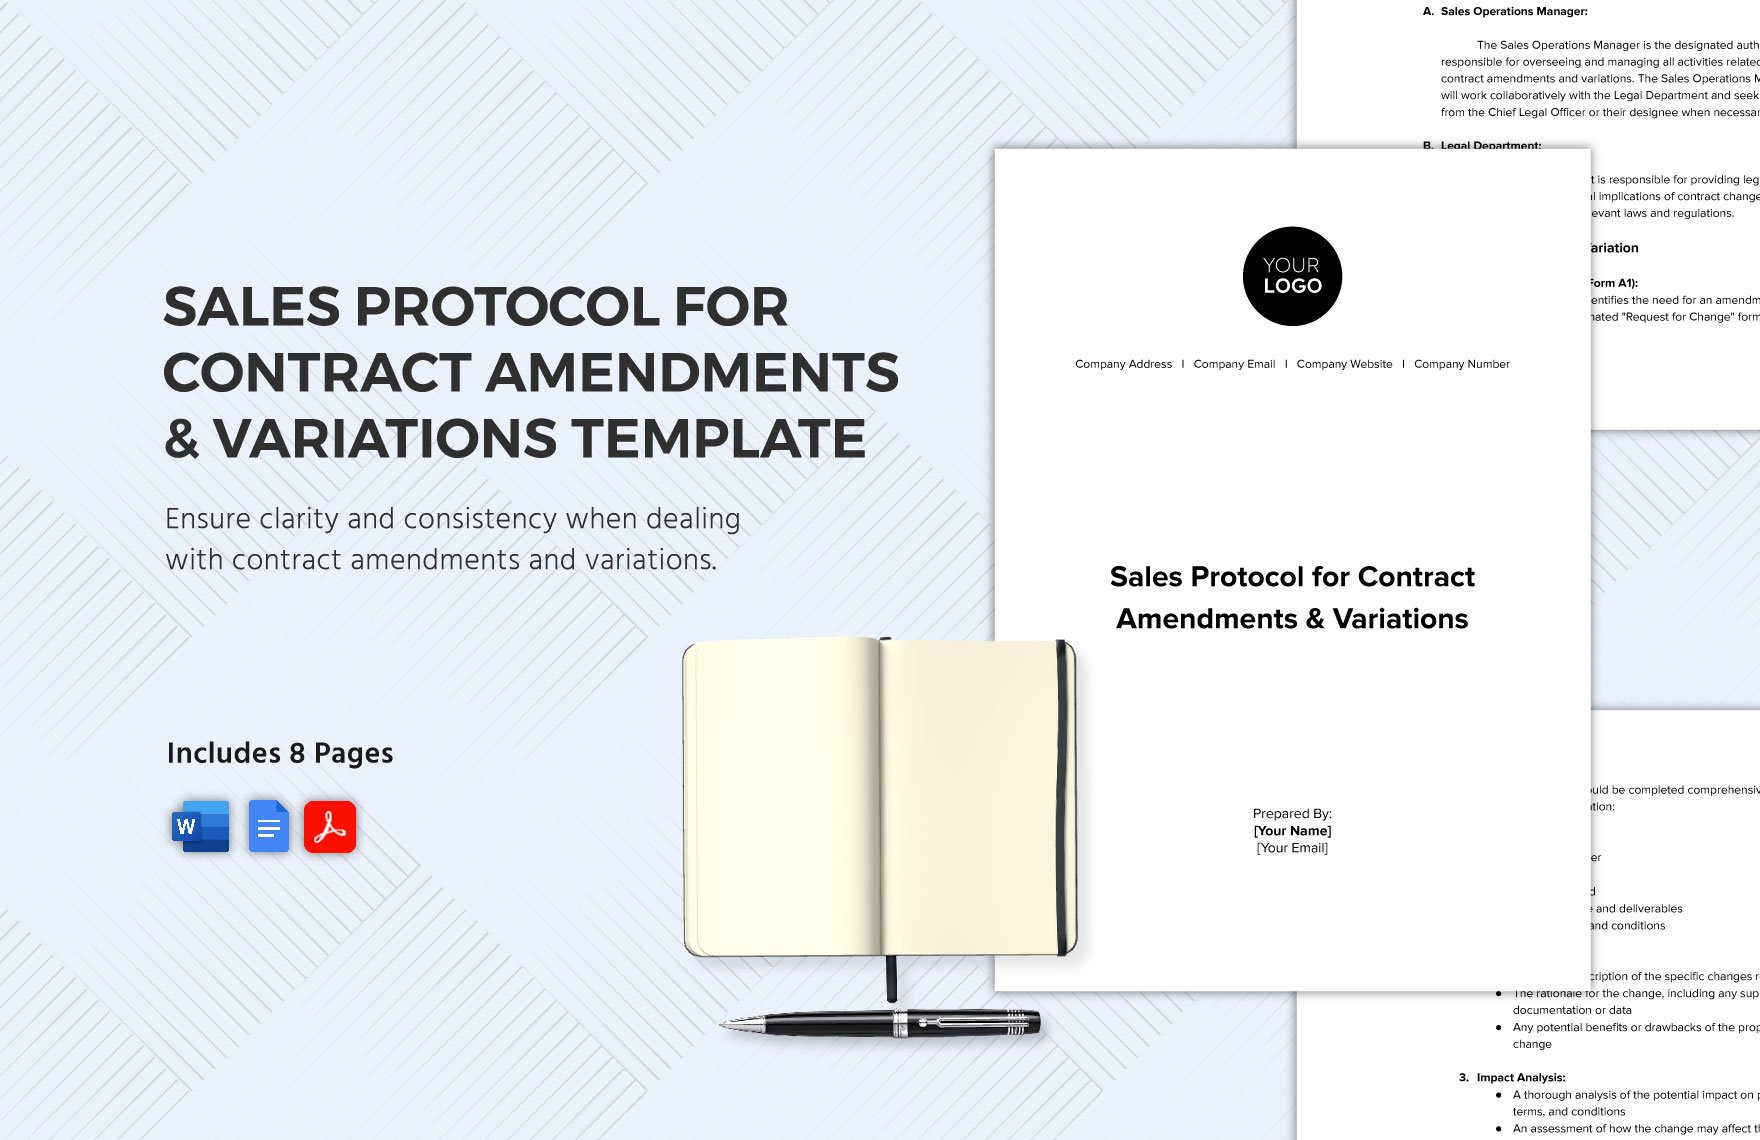 Sales Protocol for Contract Amendments & Variations Template